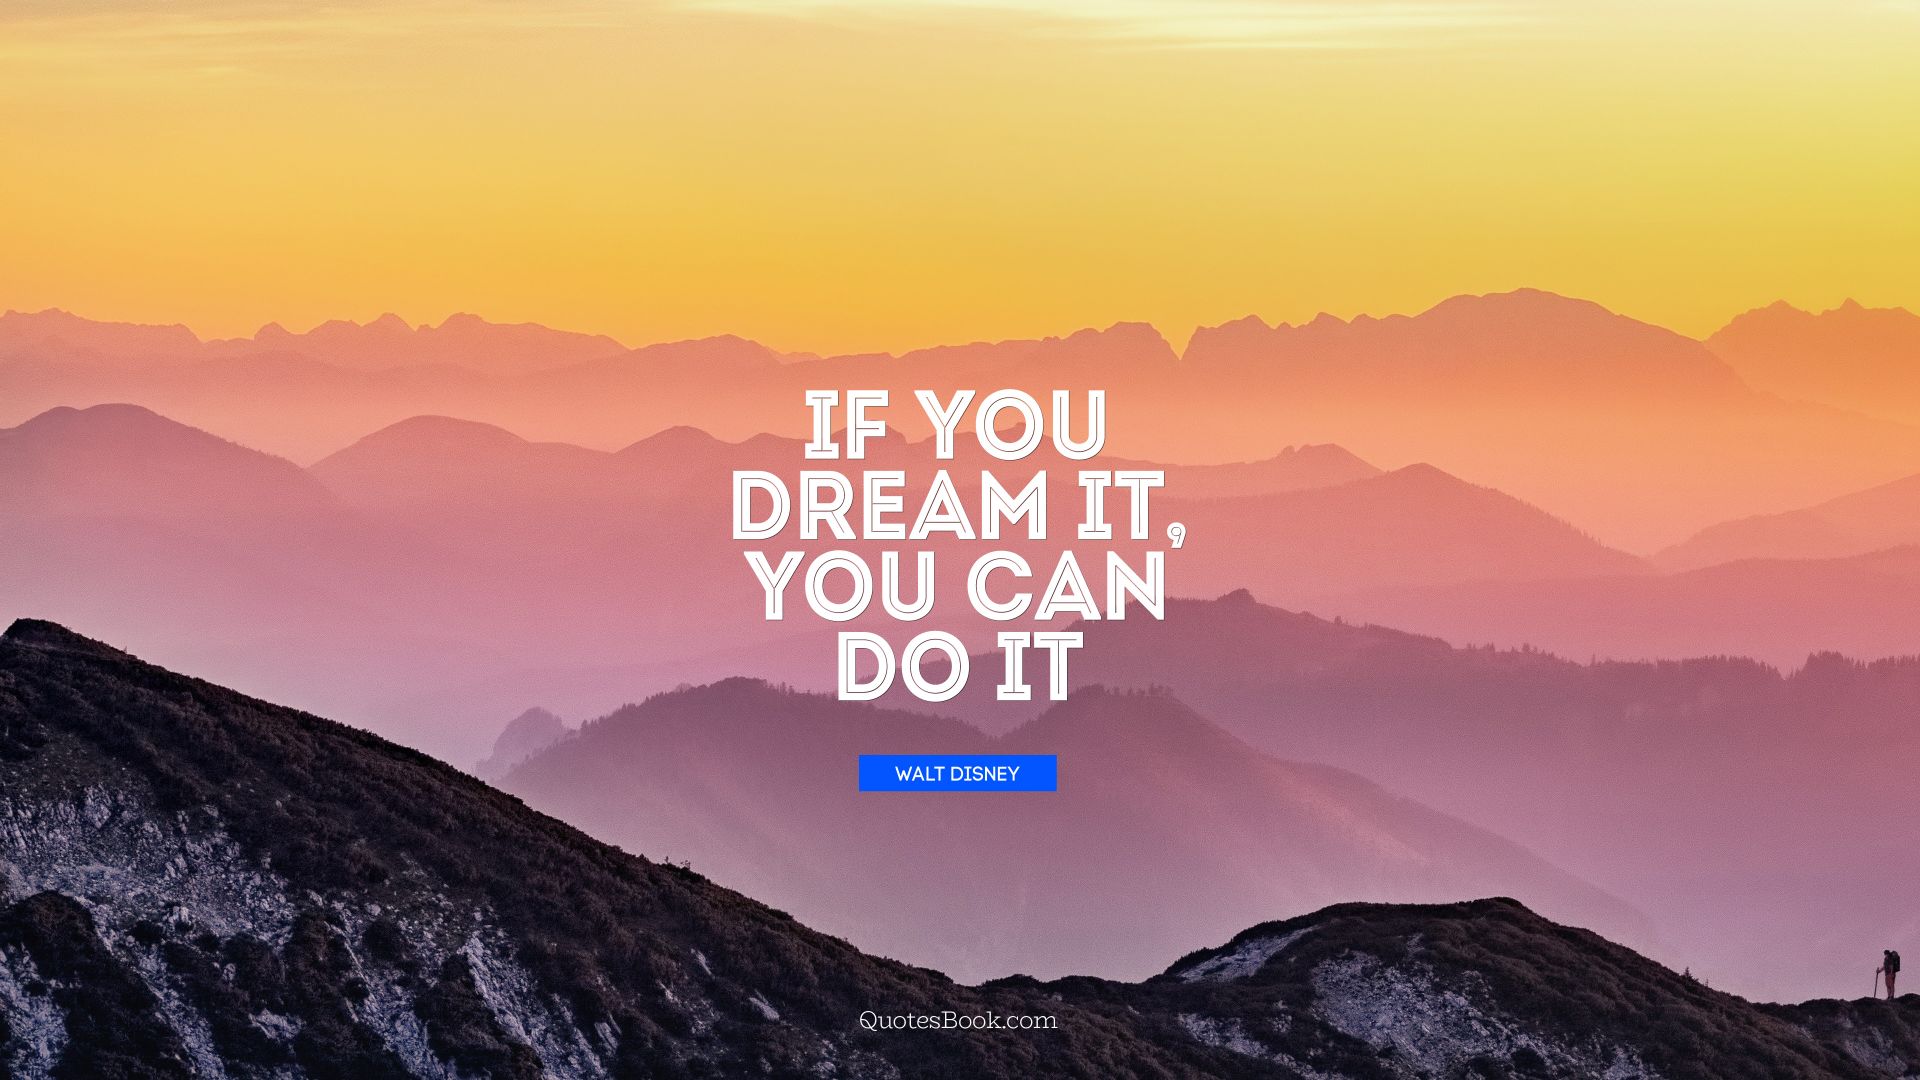 If you dream it, you can do it. - Quote by Walt Disney